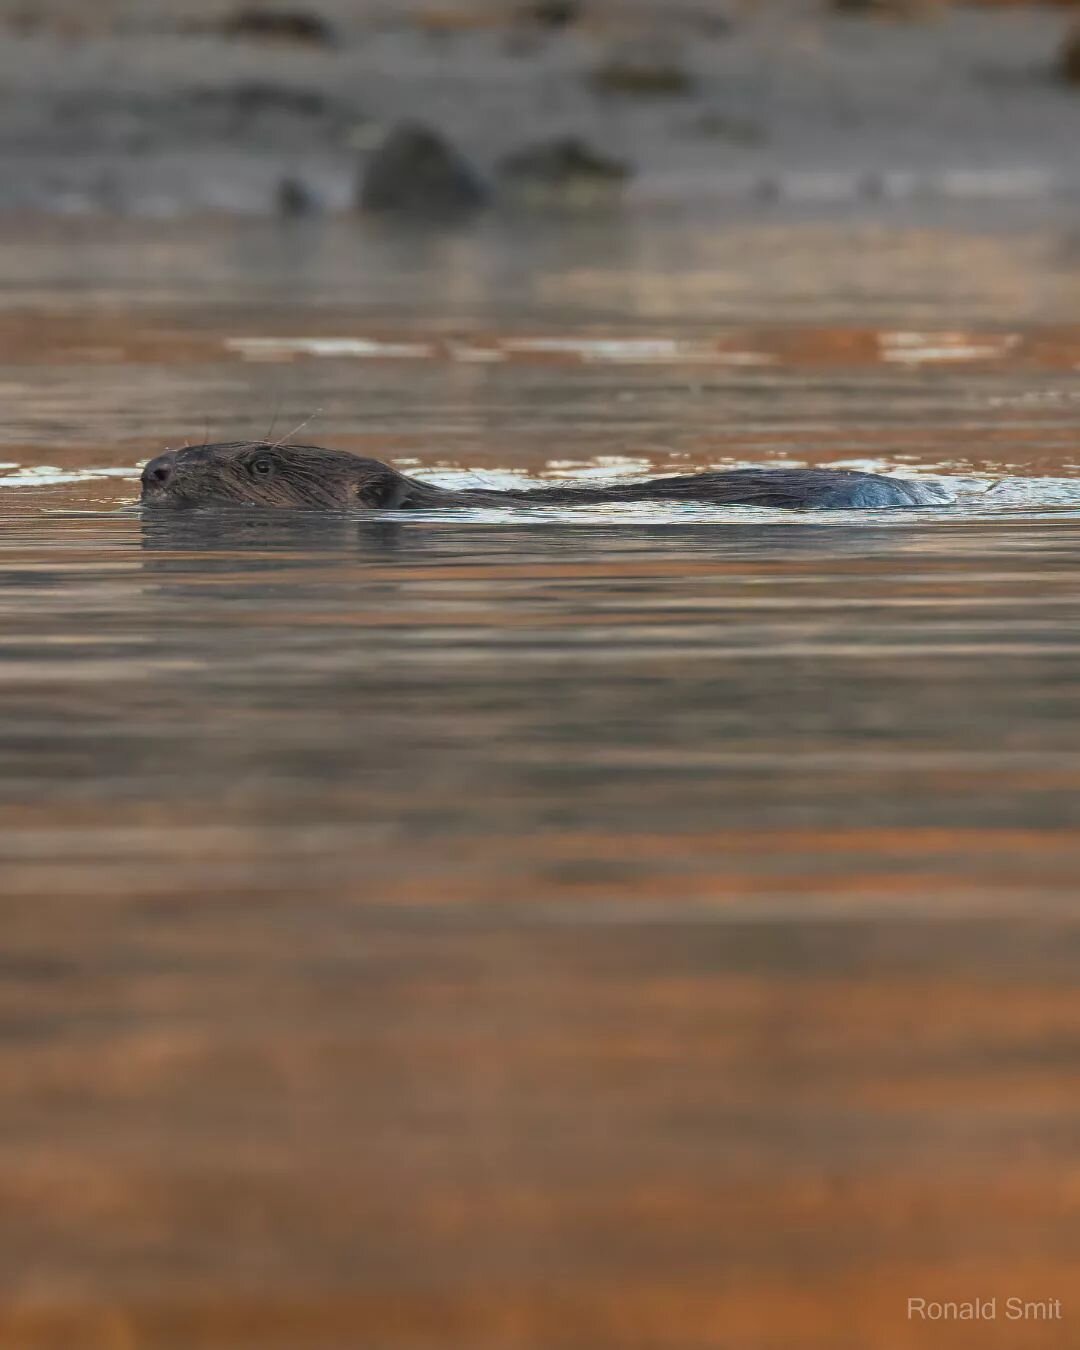 Its not a whale or dolphin, but this beaver is about as close as I can get where I live!

#beaver #beavers #bever #bevers #castorfiber #rijn #rhine #river #nederland #thenetherlands #roots_nl #vroegevogels_bnnvara #zoomnl #roots #nfnl #cameranu_nl #c